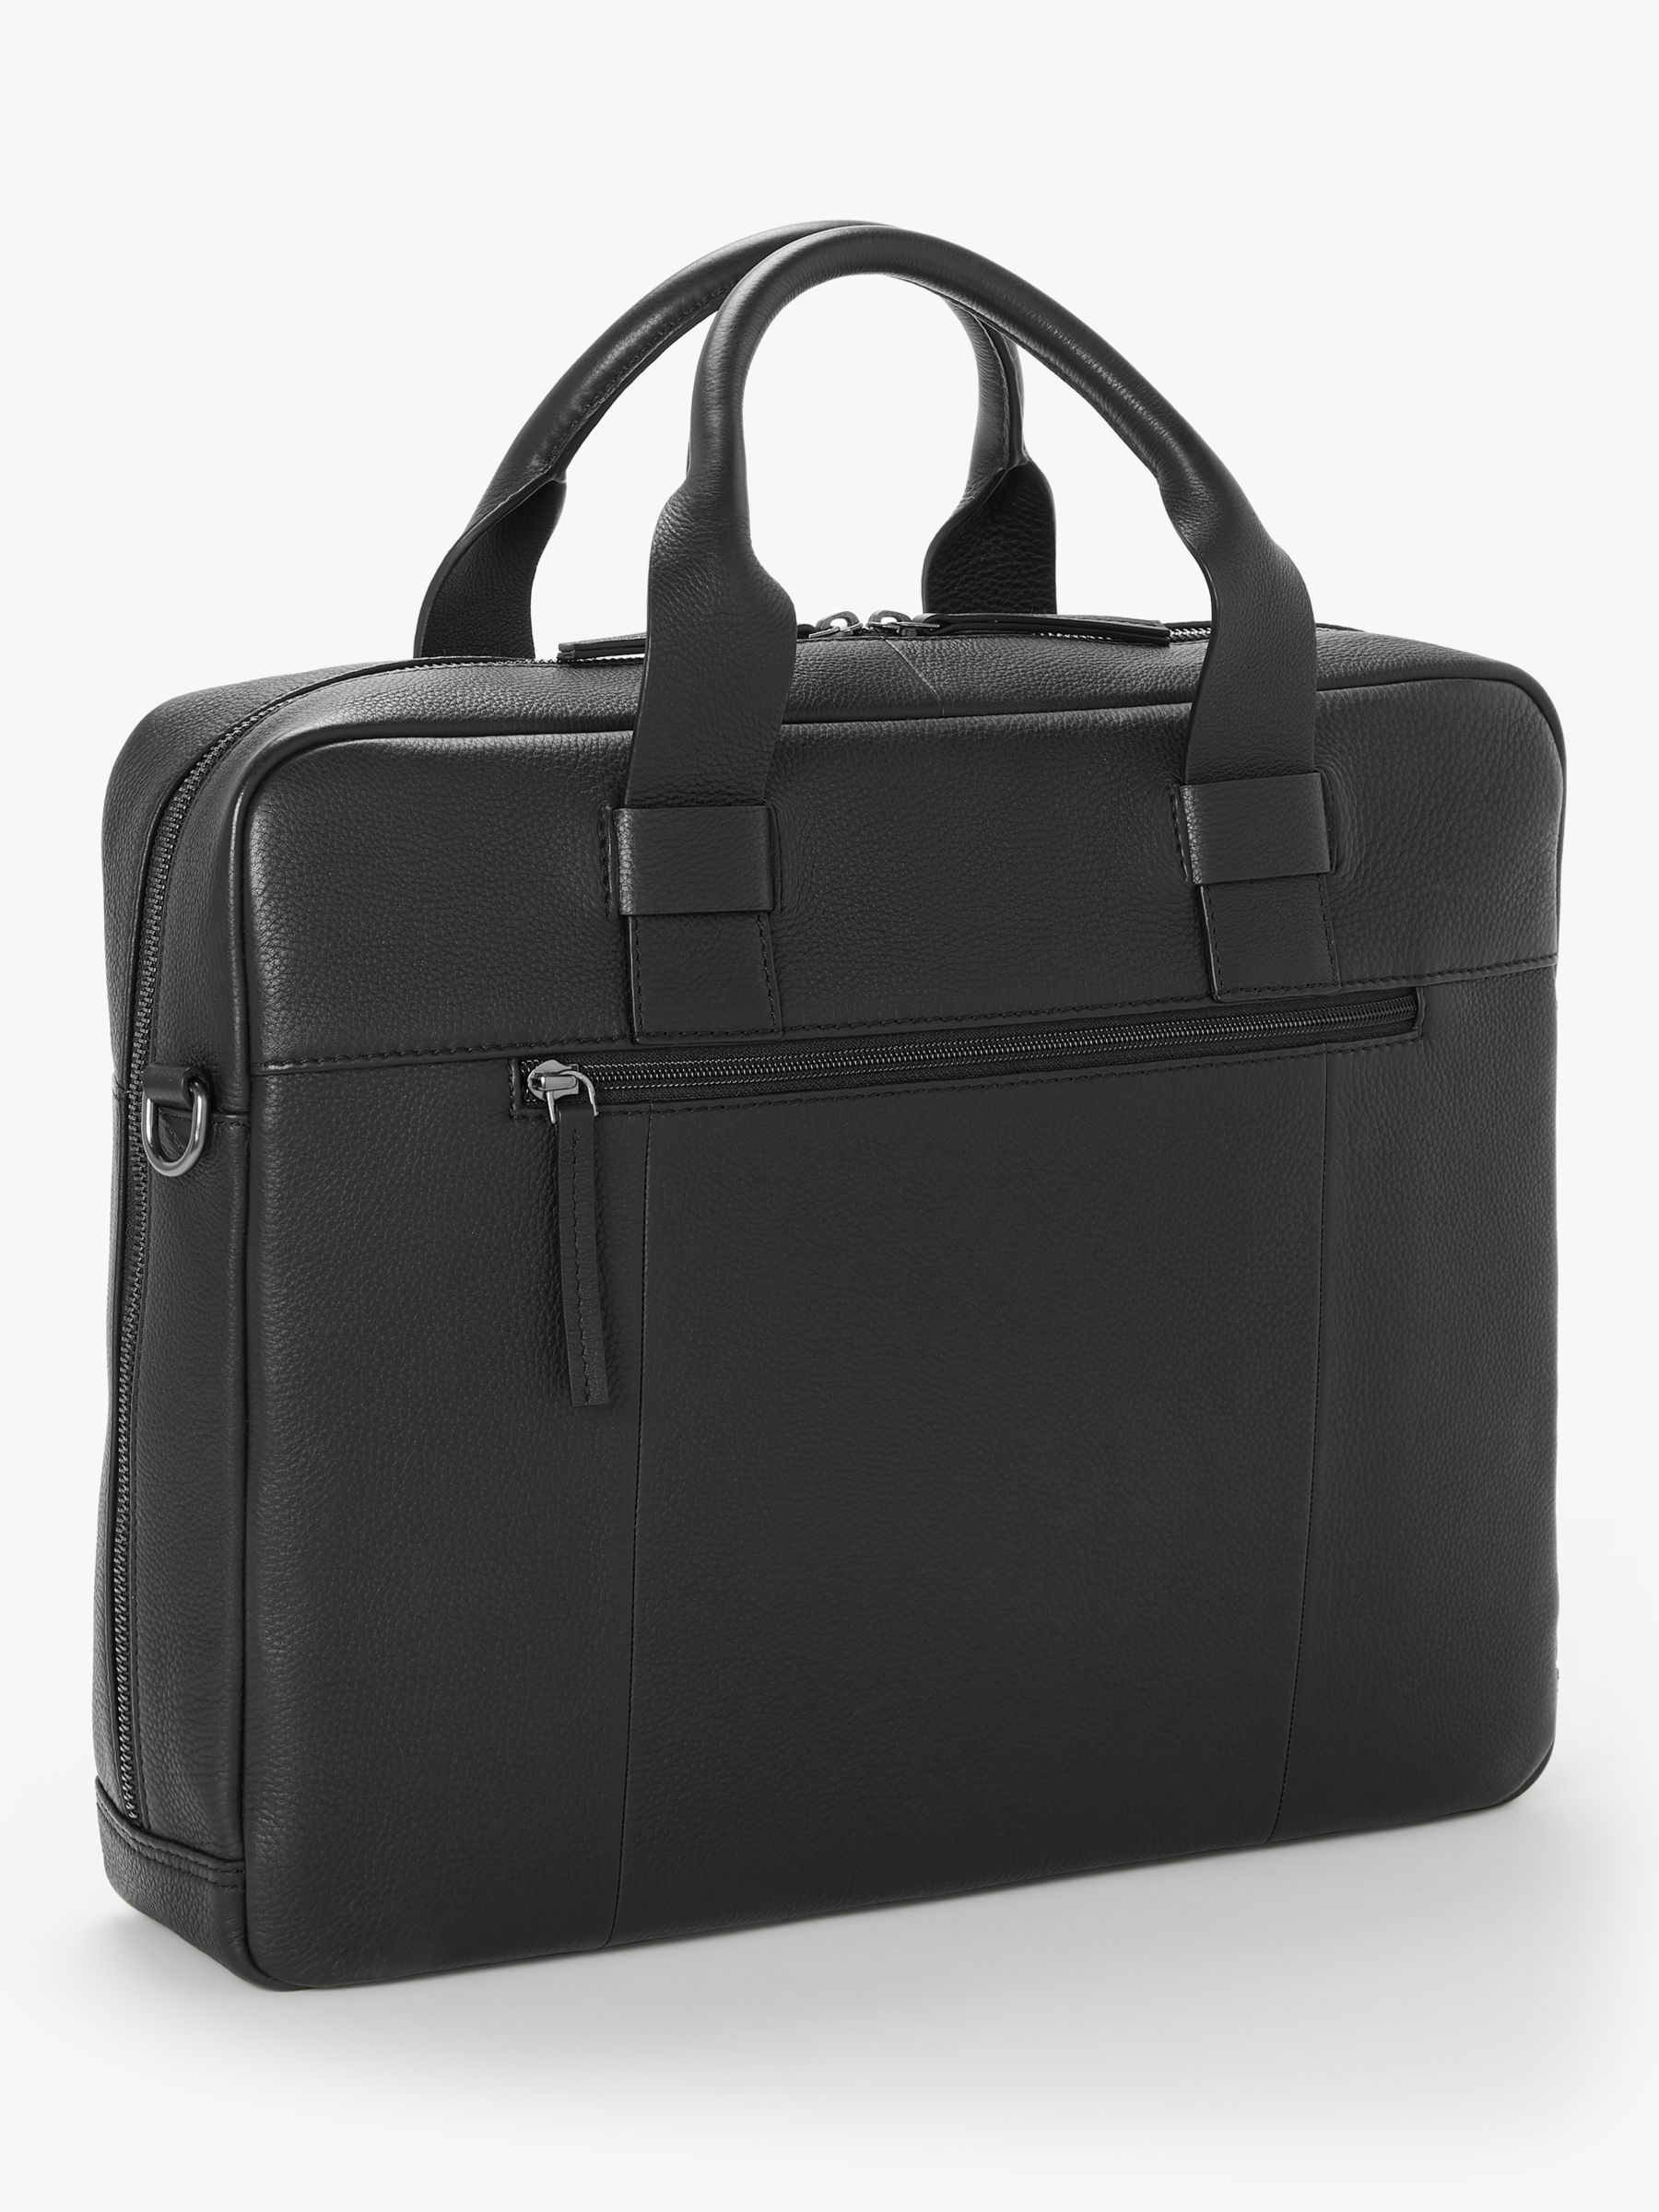 Buy John Lewis Oslo Leather Briefcase Online at johnlewis.com